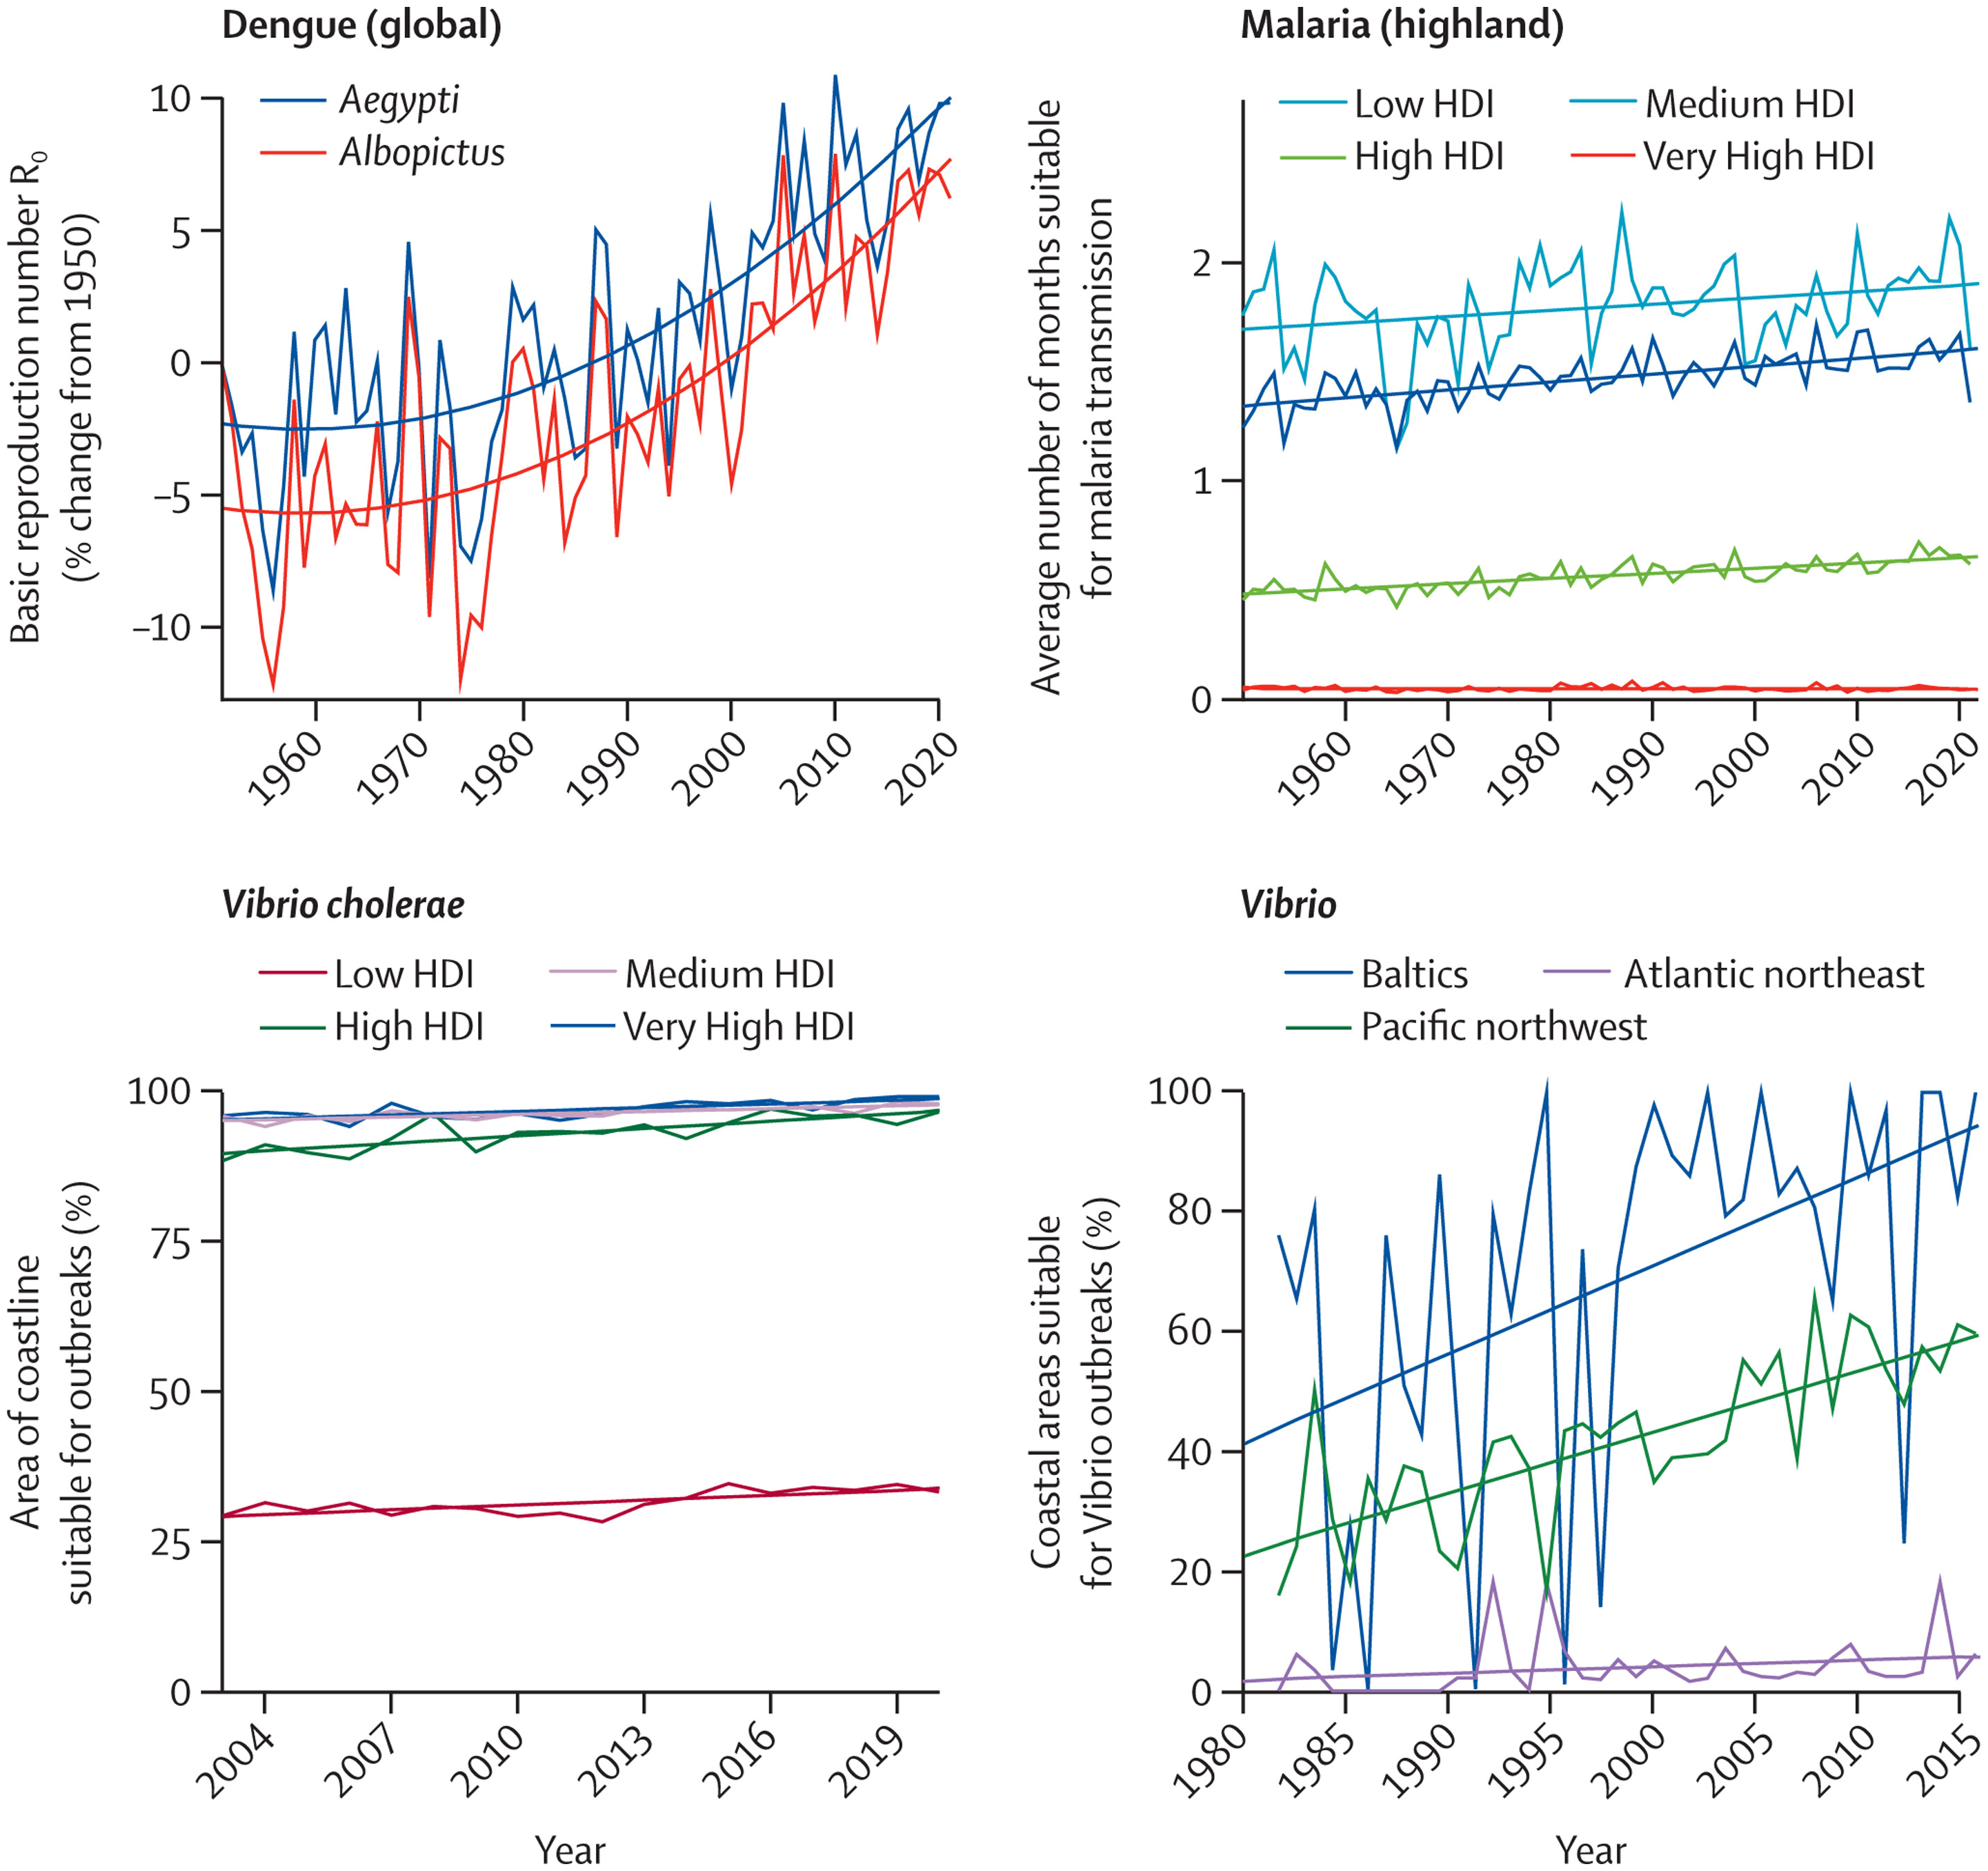 Change in climate suitability for infectious diseases. Thin lines show the annual change. Thick lines show the trend since 1951 (for malaria), 1951 (for dengue), 1982 (for Vibrio bacteria), and 2003 (for Vibrio cholerae). HDI=human development index. With the increased movement of people and goods, urbanisation, and climate change, Aedes-transmitted arboviruses spread rapidly in the past two decades, and half the world population now lives in countries where dengue is present.115, 116, 117 Combining data on temperature, rainfall, and population, this indicator tracks the basic reproduction number (R0) for dengue, Zika, and chikungunya as a proxy for their transmissibility and, new to this report, the number of months suitable for their transmission. On average, during 2012-2021, the R0 increased by 11.5% for the transmission of dengue by Aedes aegypti and 12.0% for the transmission of dengue by Aedes albopictus; and 12.0% for the transmission of chikungunya by A albopictus, and 12.4% for the transmission of Zika by A aegypti compared with 1951-1960, globally. During the same period, the length of the transmission season increased for all arboviruses by approximately 6%. Graphic: Romanello, et al., 2022 / The Lancet